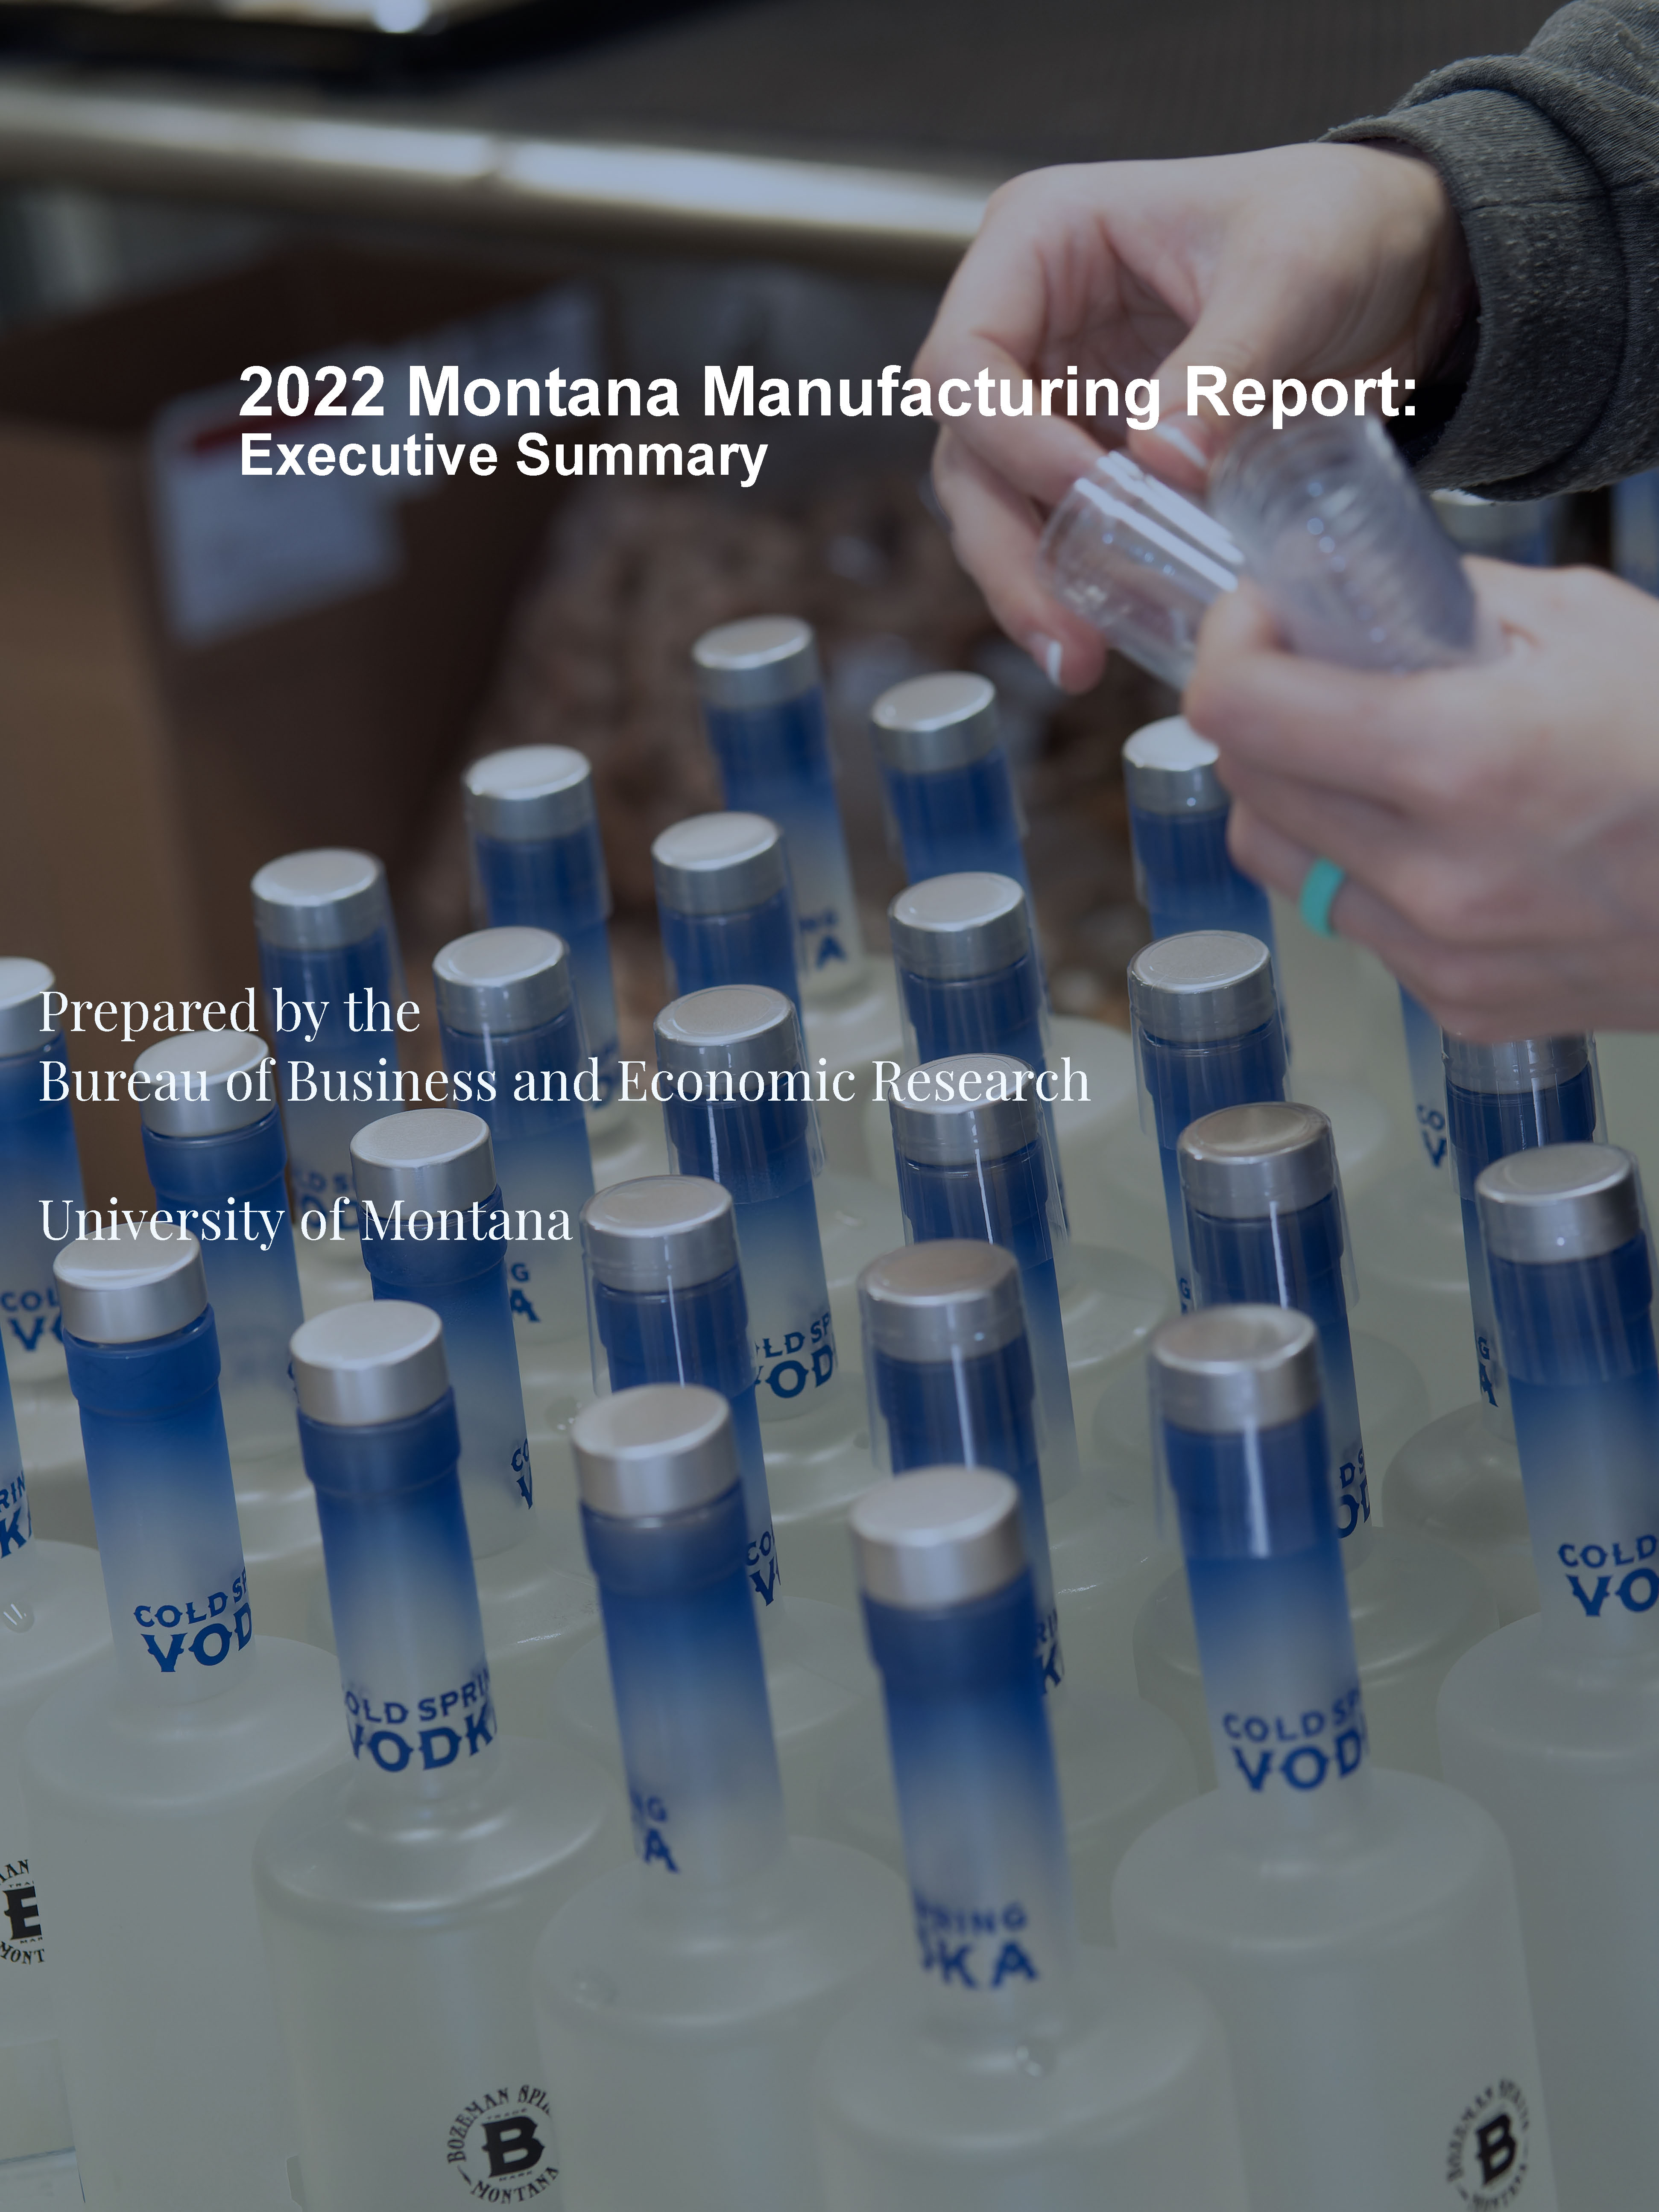 Report title plus image of bottling operation